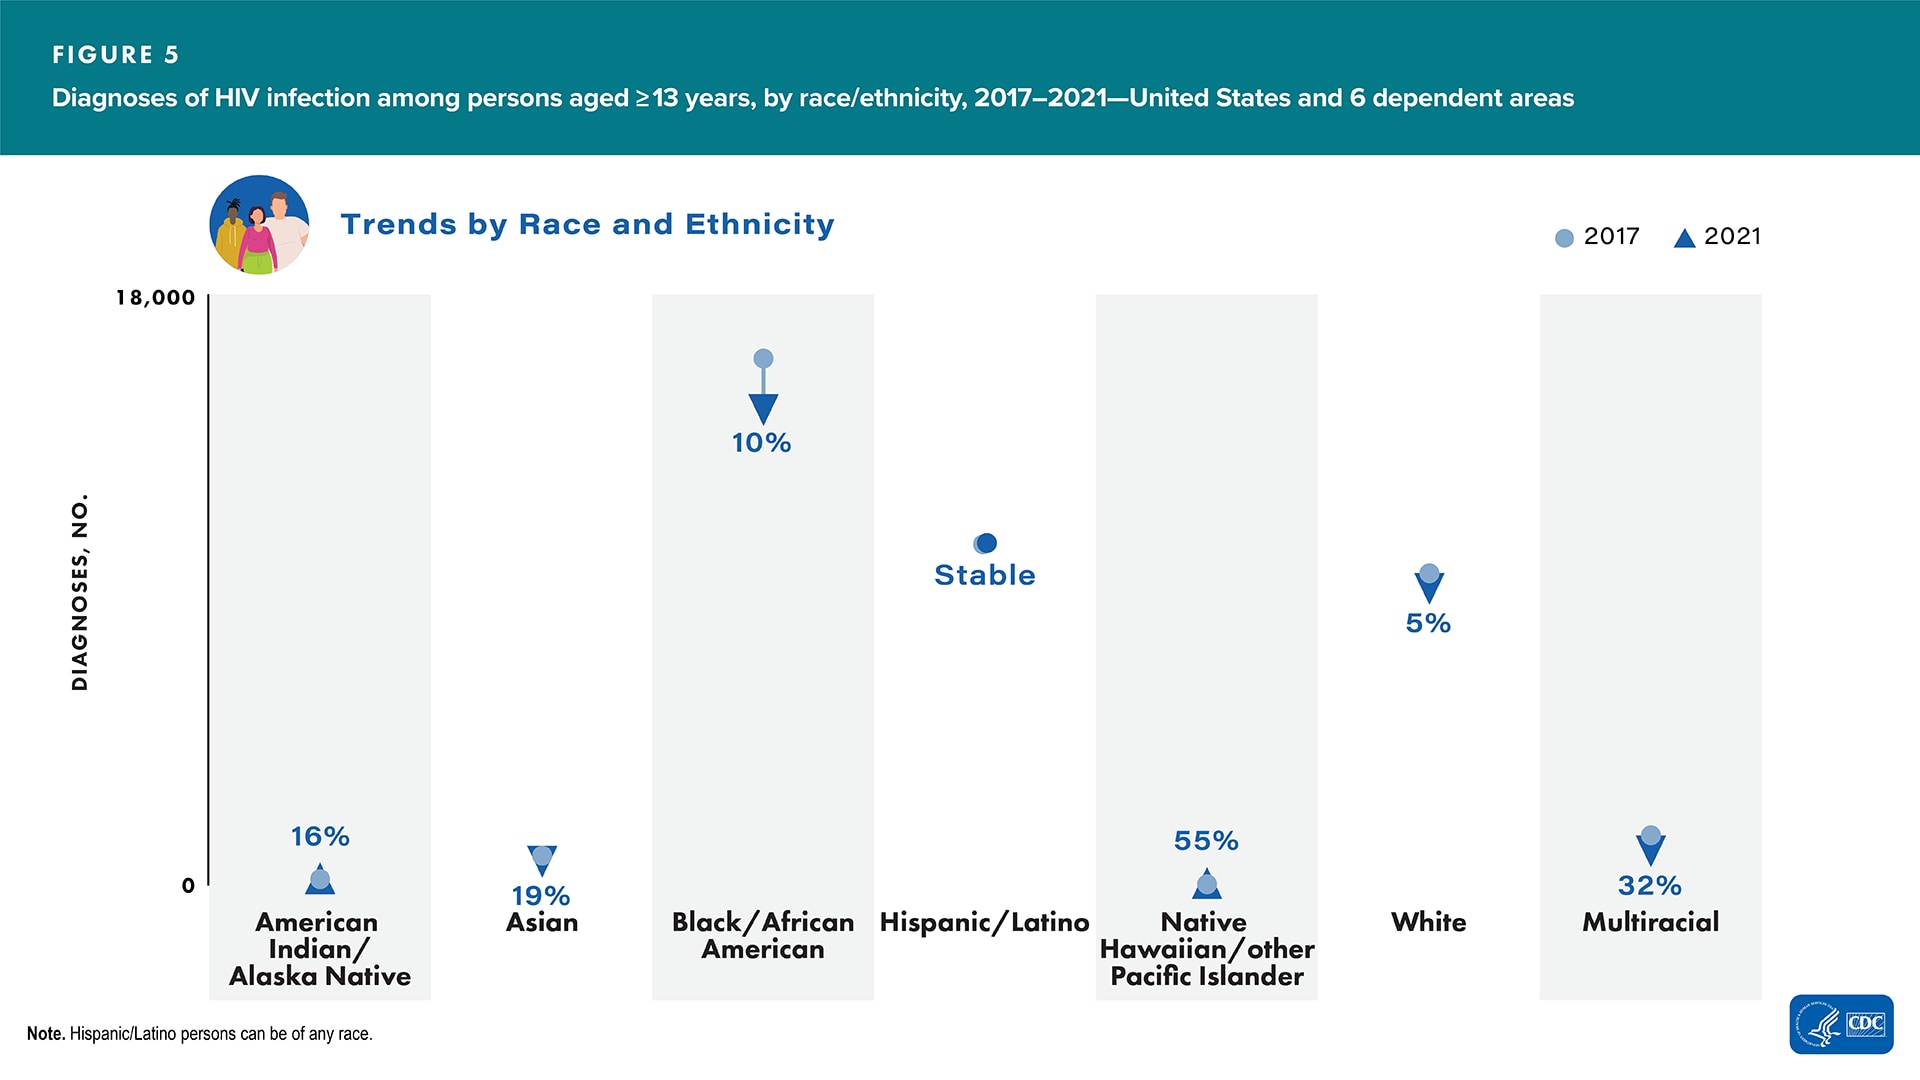 From 2017 to 2021 in the United States and 6 dependent areas, the number of diagnoses of HIV infection among American Indian/Alaska Native and Native Hawaiian/other Pacific Islander persons aged ≥13 years increased. The number of diagnoses of HIV infection among Asian, Black/African American, White, and multiracial persons aged ≥13 years decreased. The number of diagnoses of HIV infection among Hispanic/Latino persons aged ≥13 years remained stable.